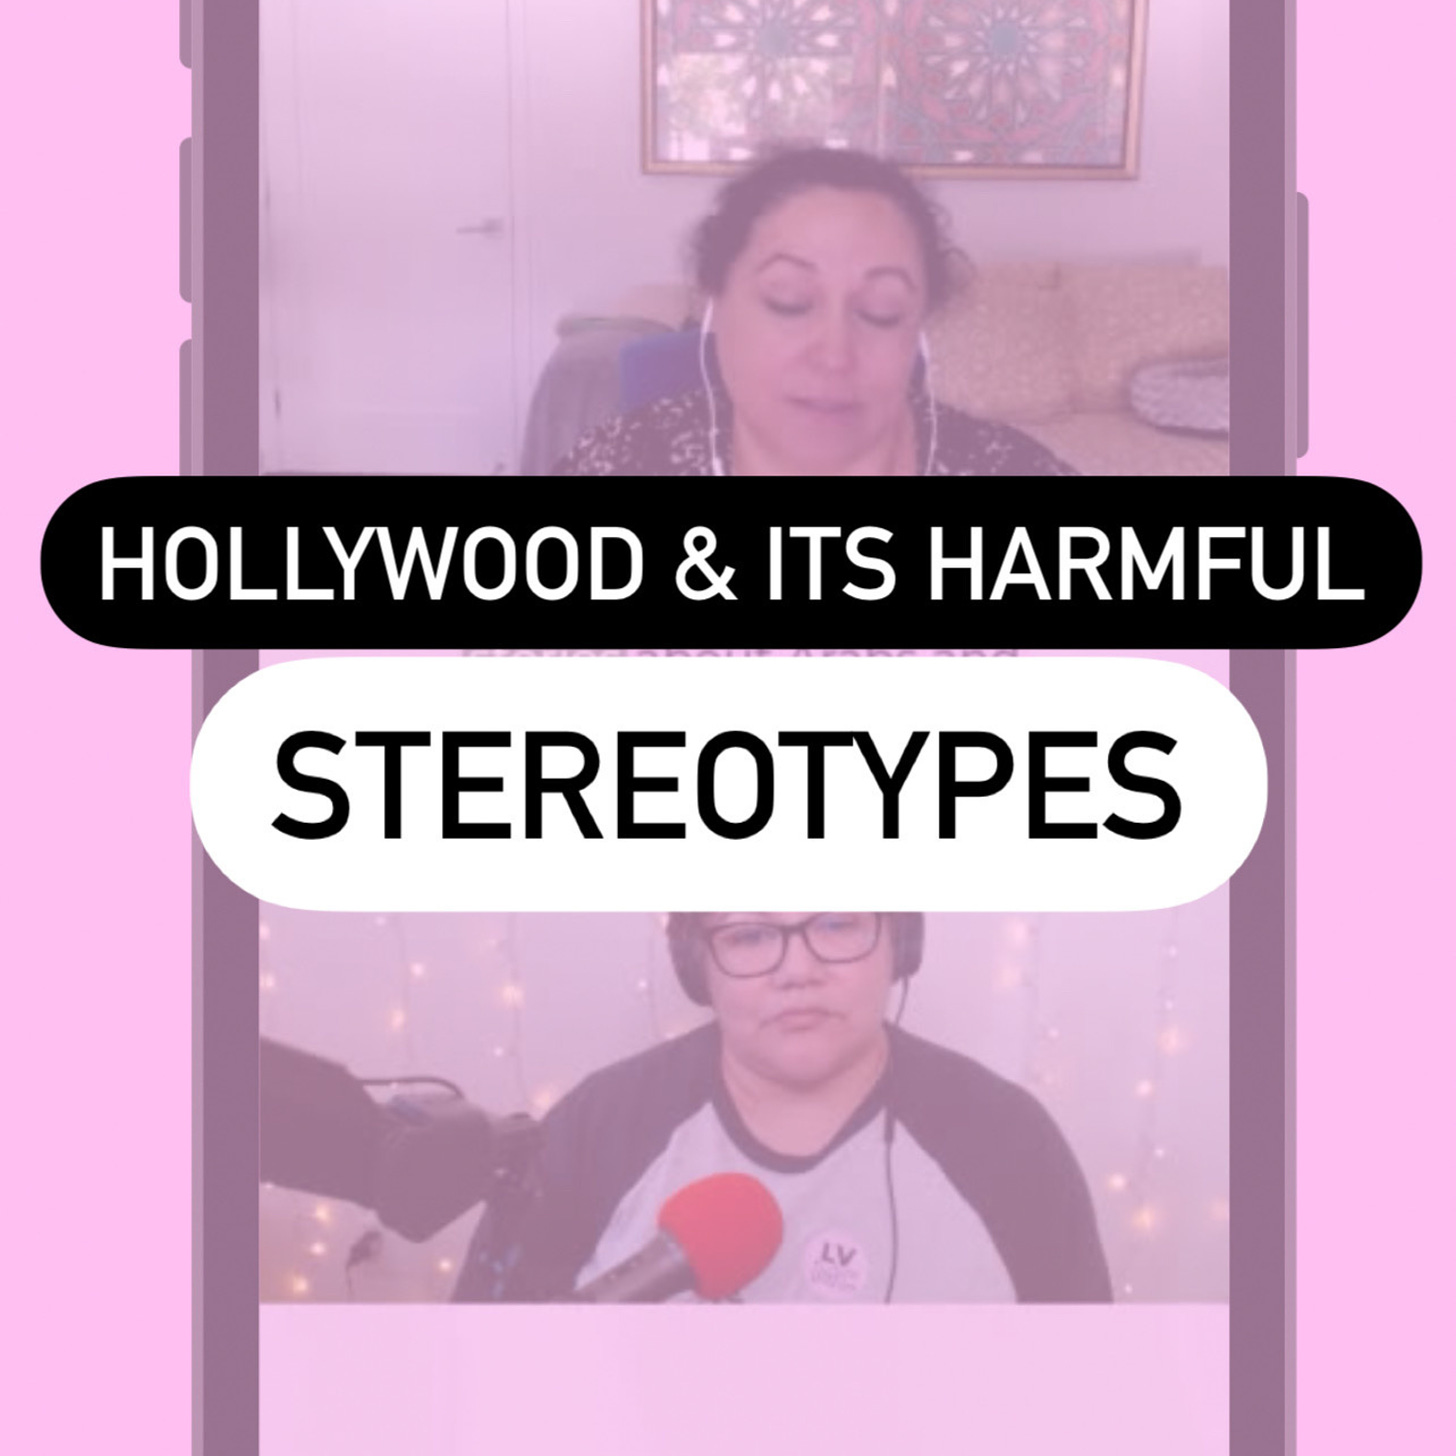 Words Hollywood and Its Harmful Stereotype superimposed over the image of two women talking on a phone video